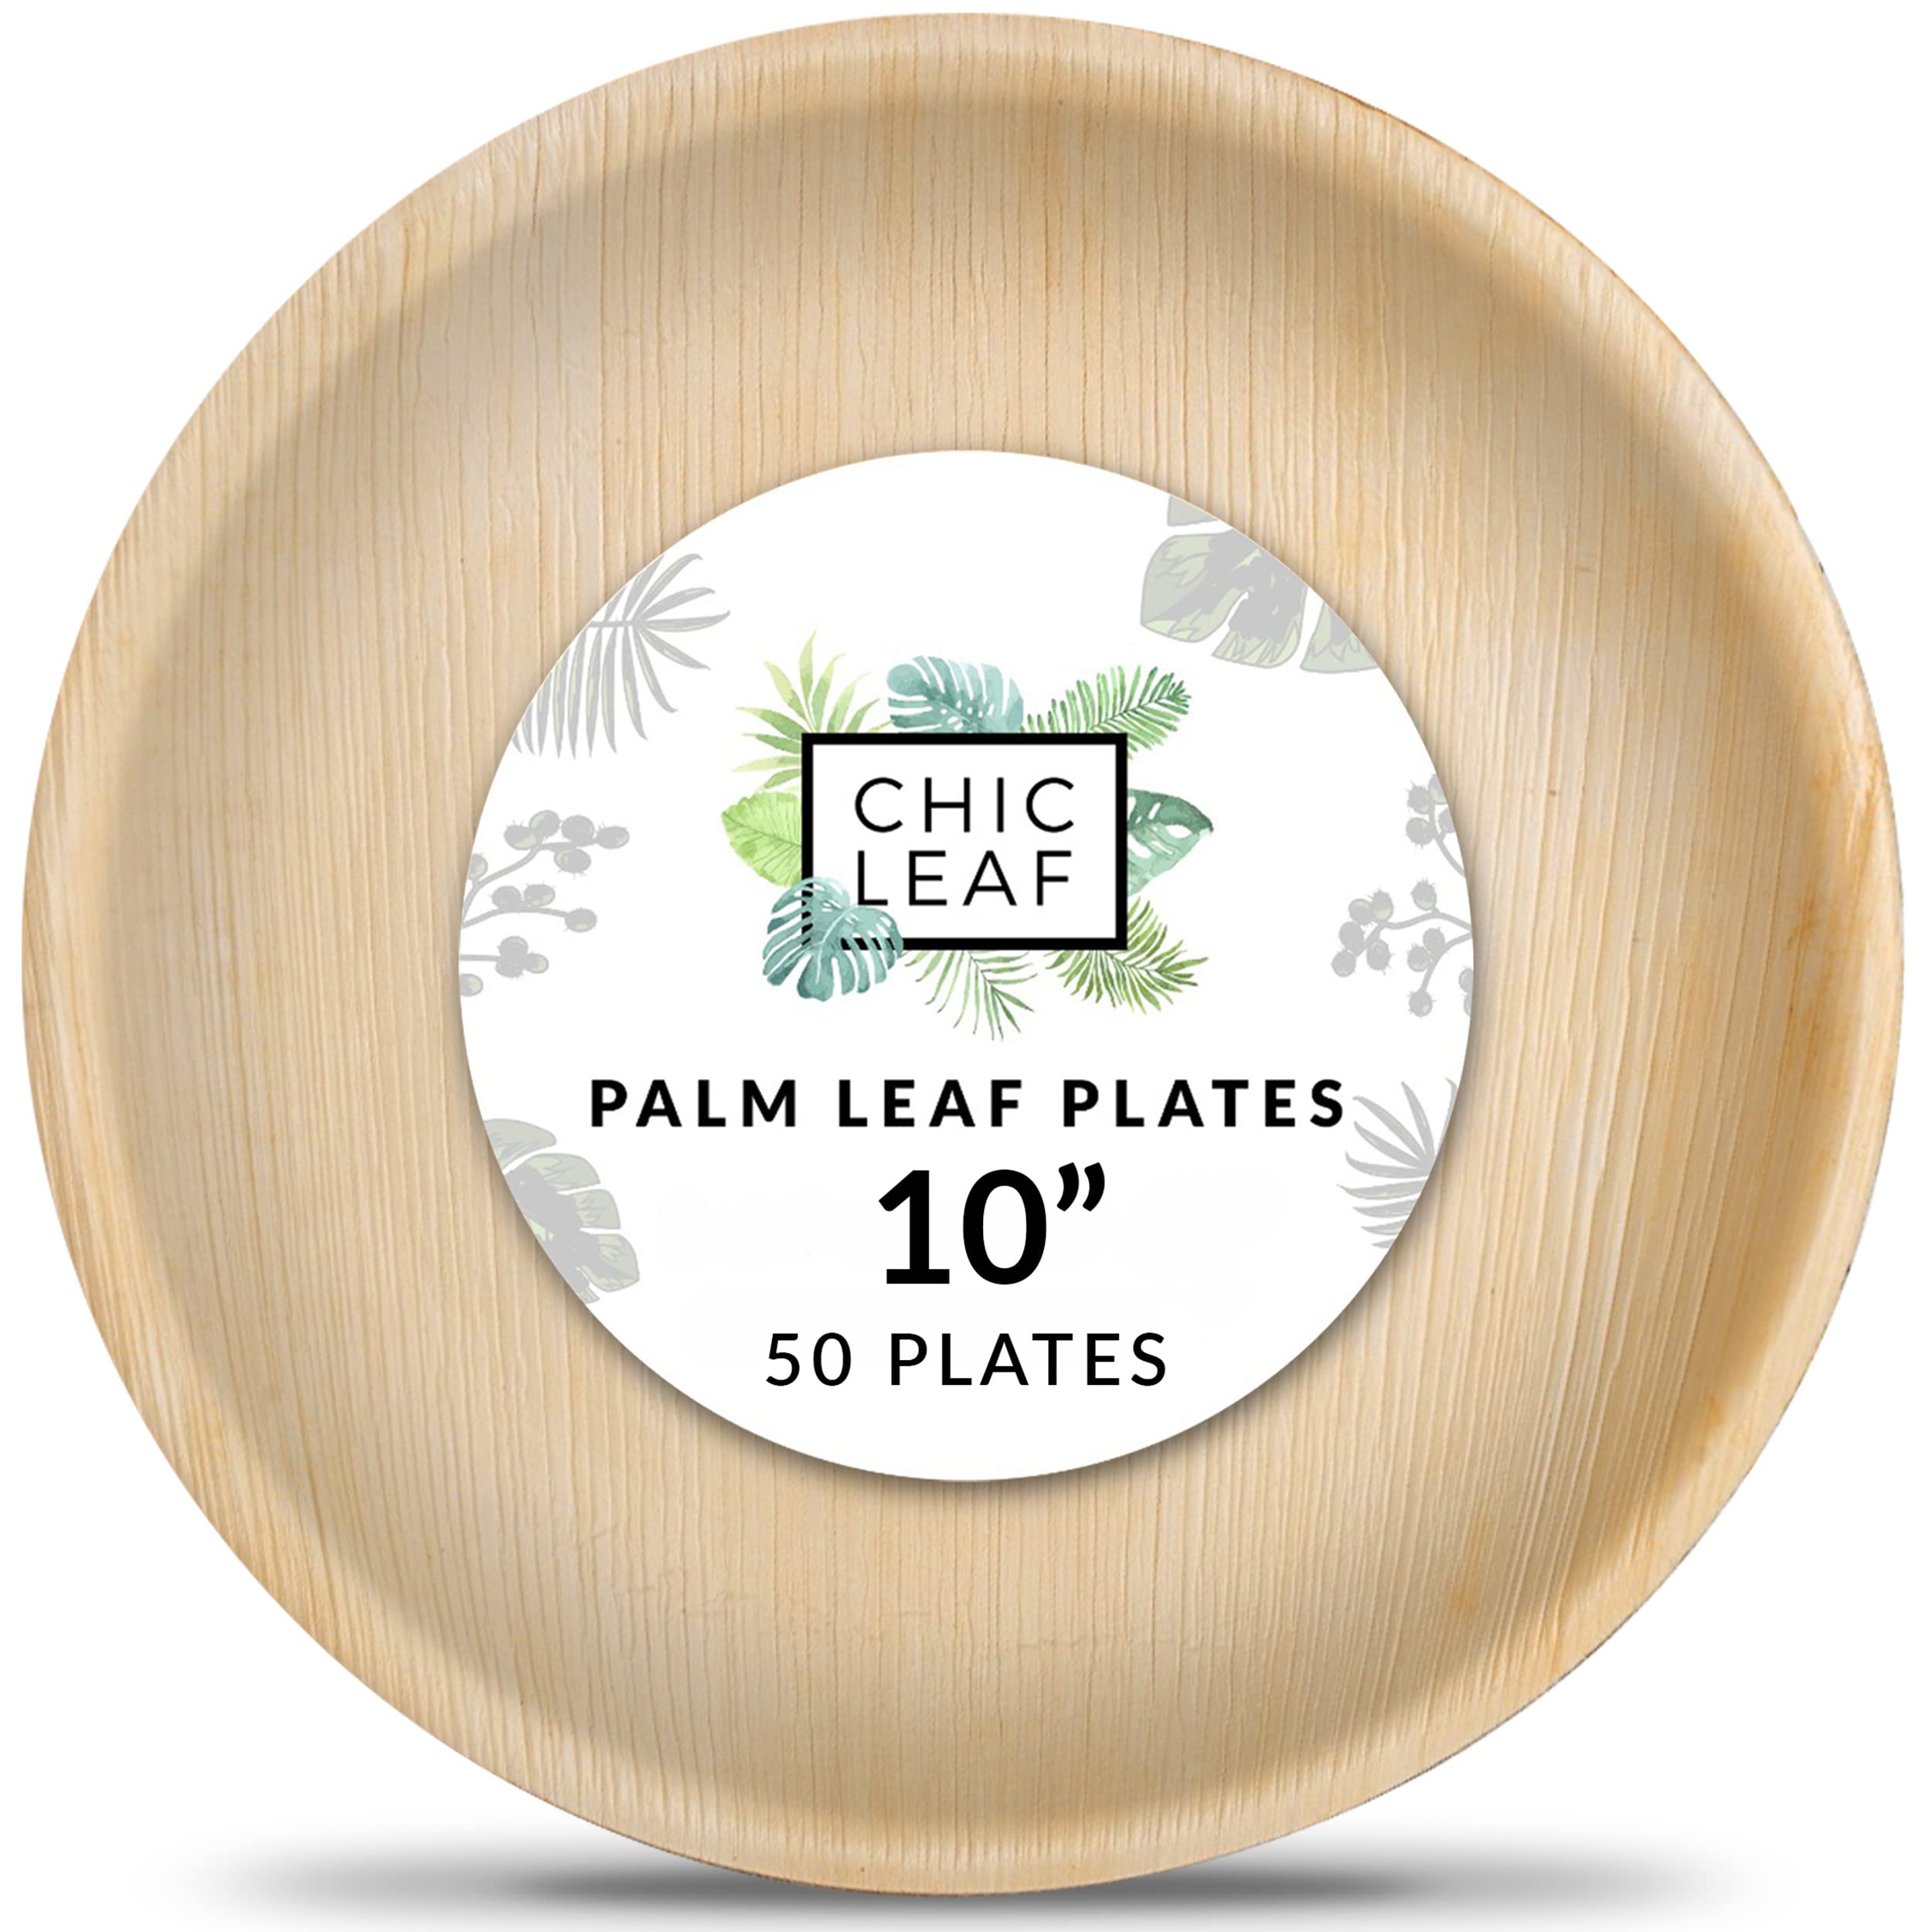 Chic Leaf Palm Leaf Plates Like Disposable Bamboo Plates 10" Round (50 pack) - Compostable Plates and Biodegradable Eco Friendly Party and Wedd...